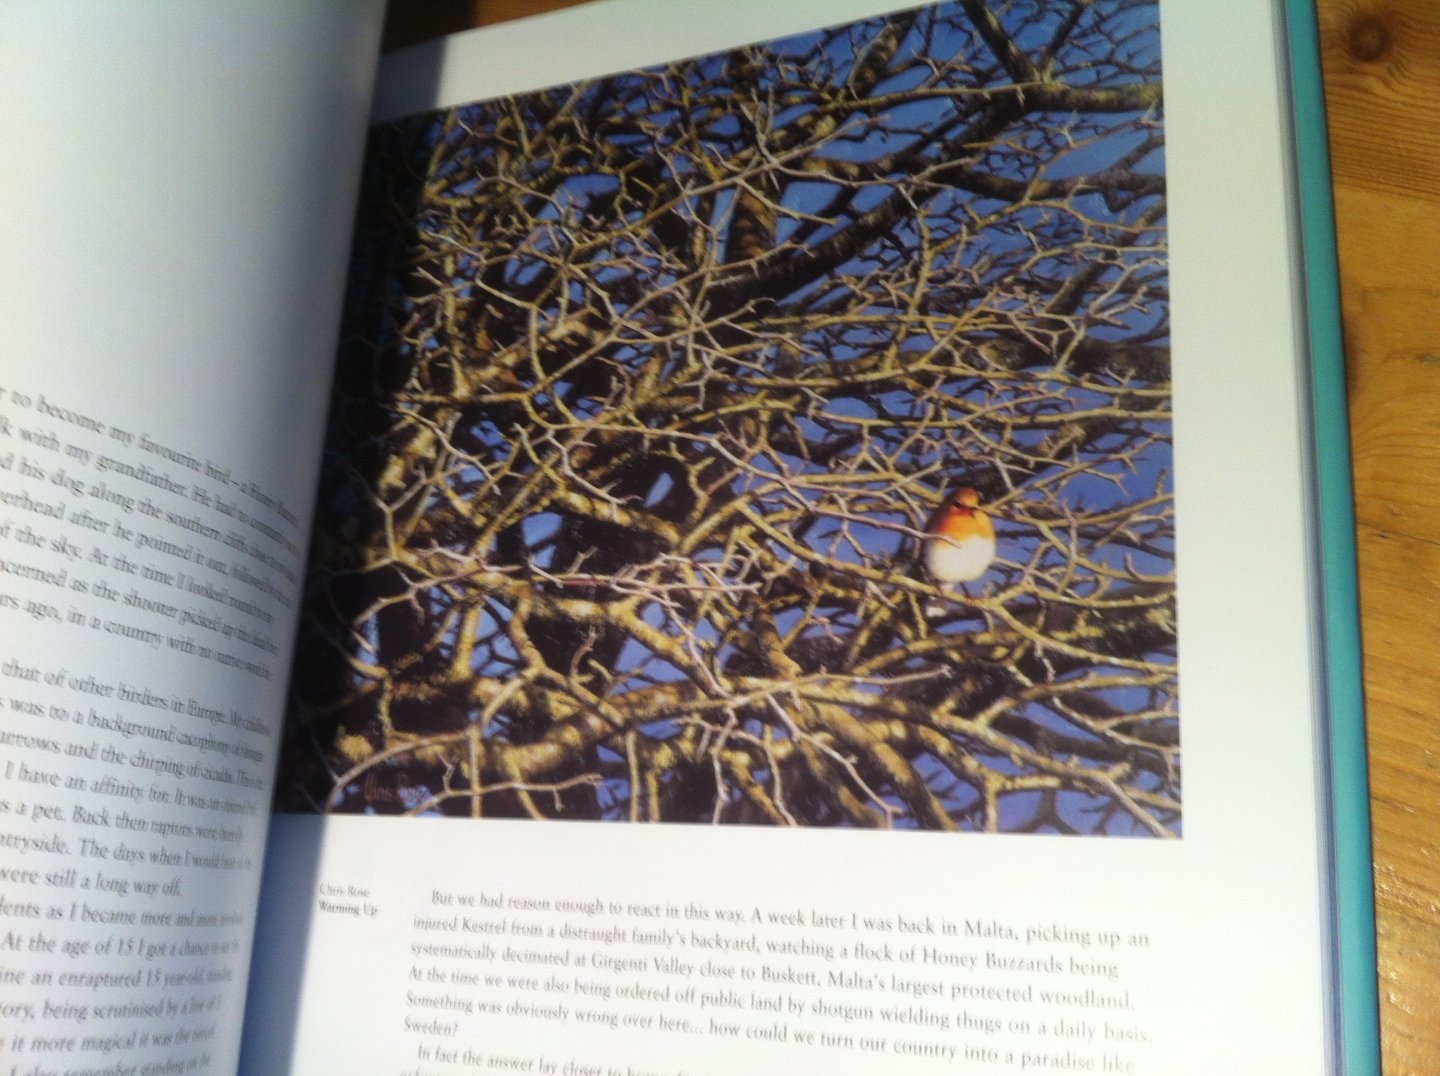 Brown, Andy & Michael Warren - There and Back? A Celebration of Bird Migration